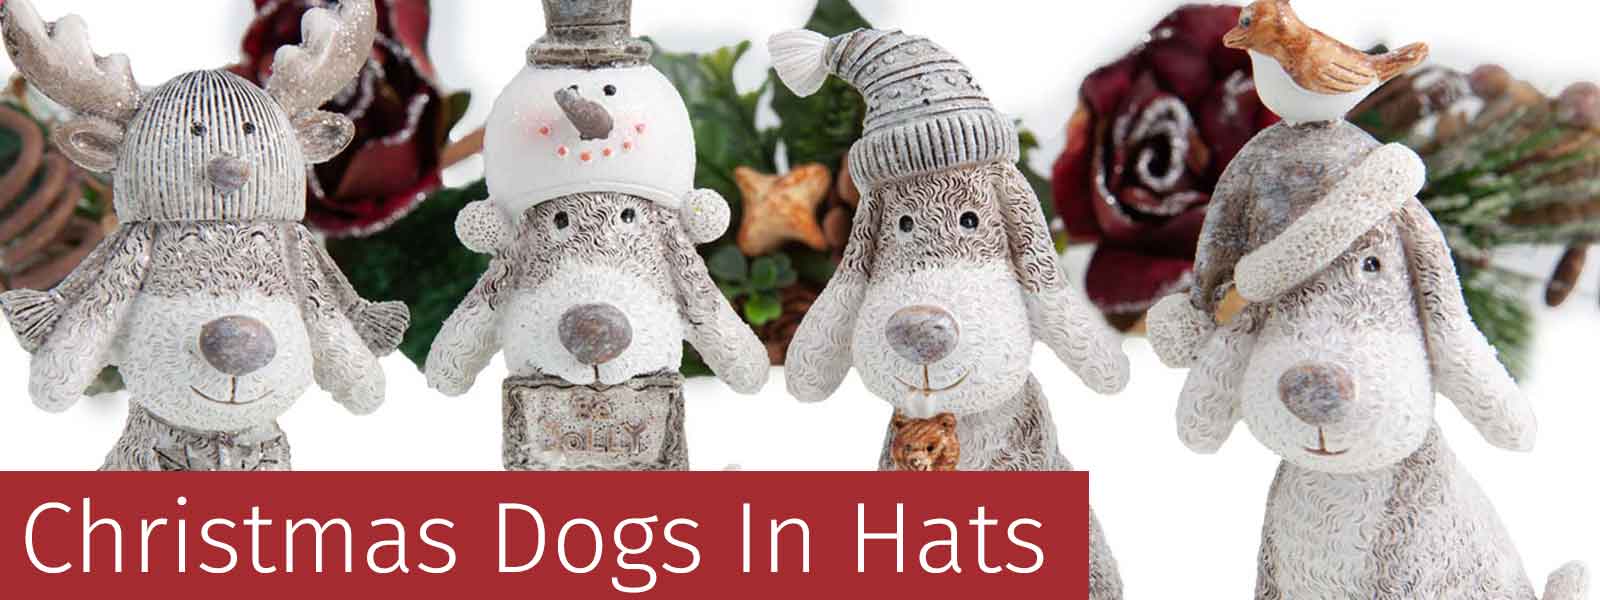 Dogs In Hats Christmas Decorations